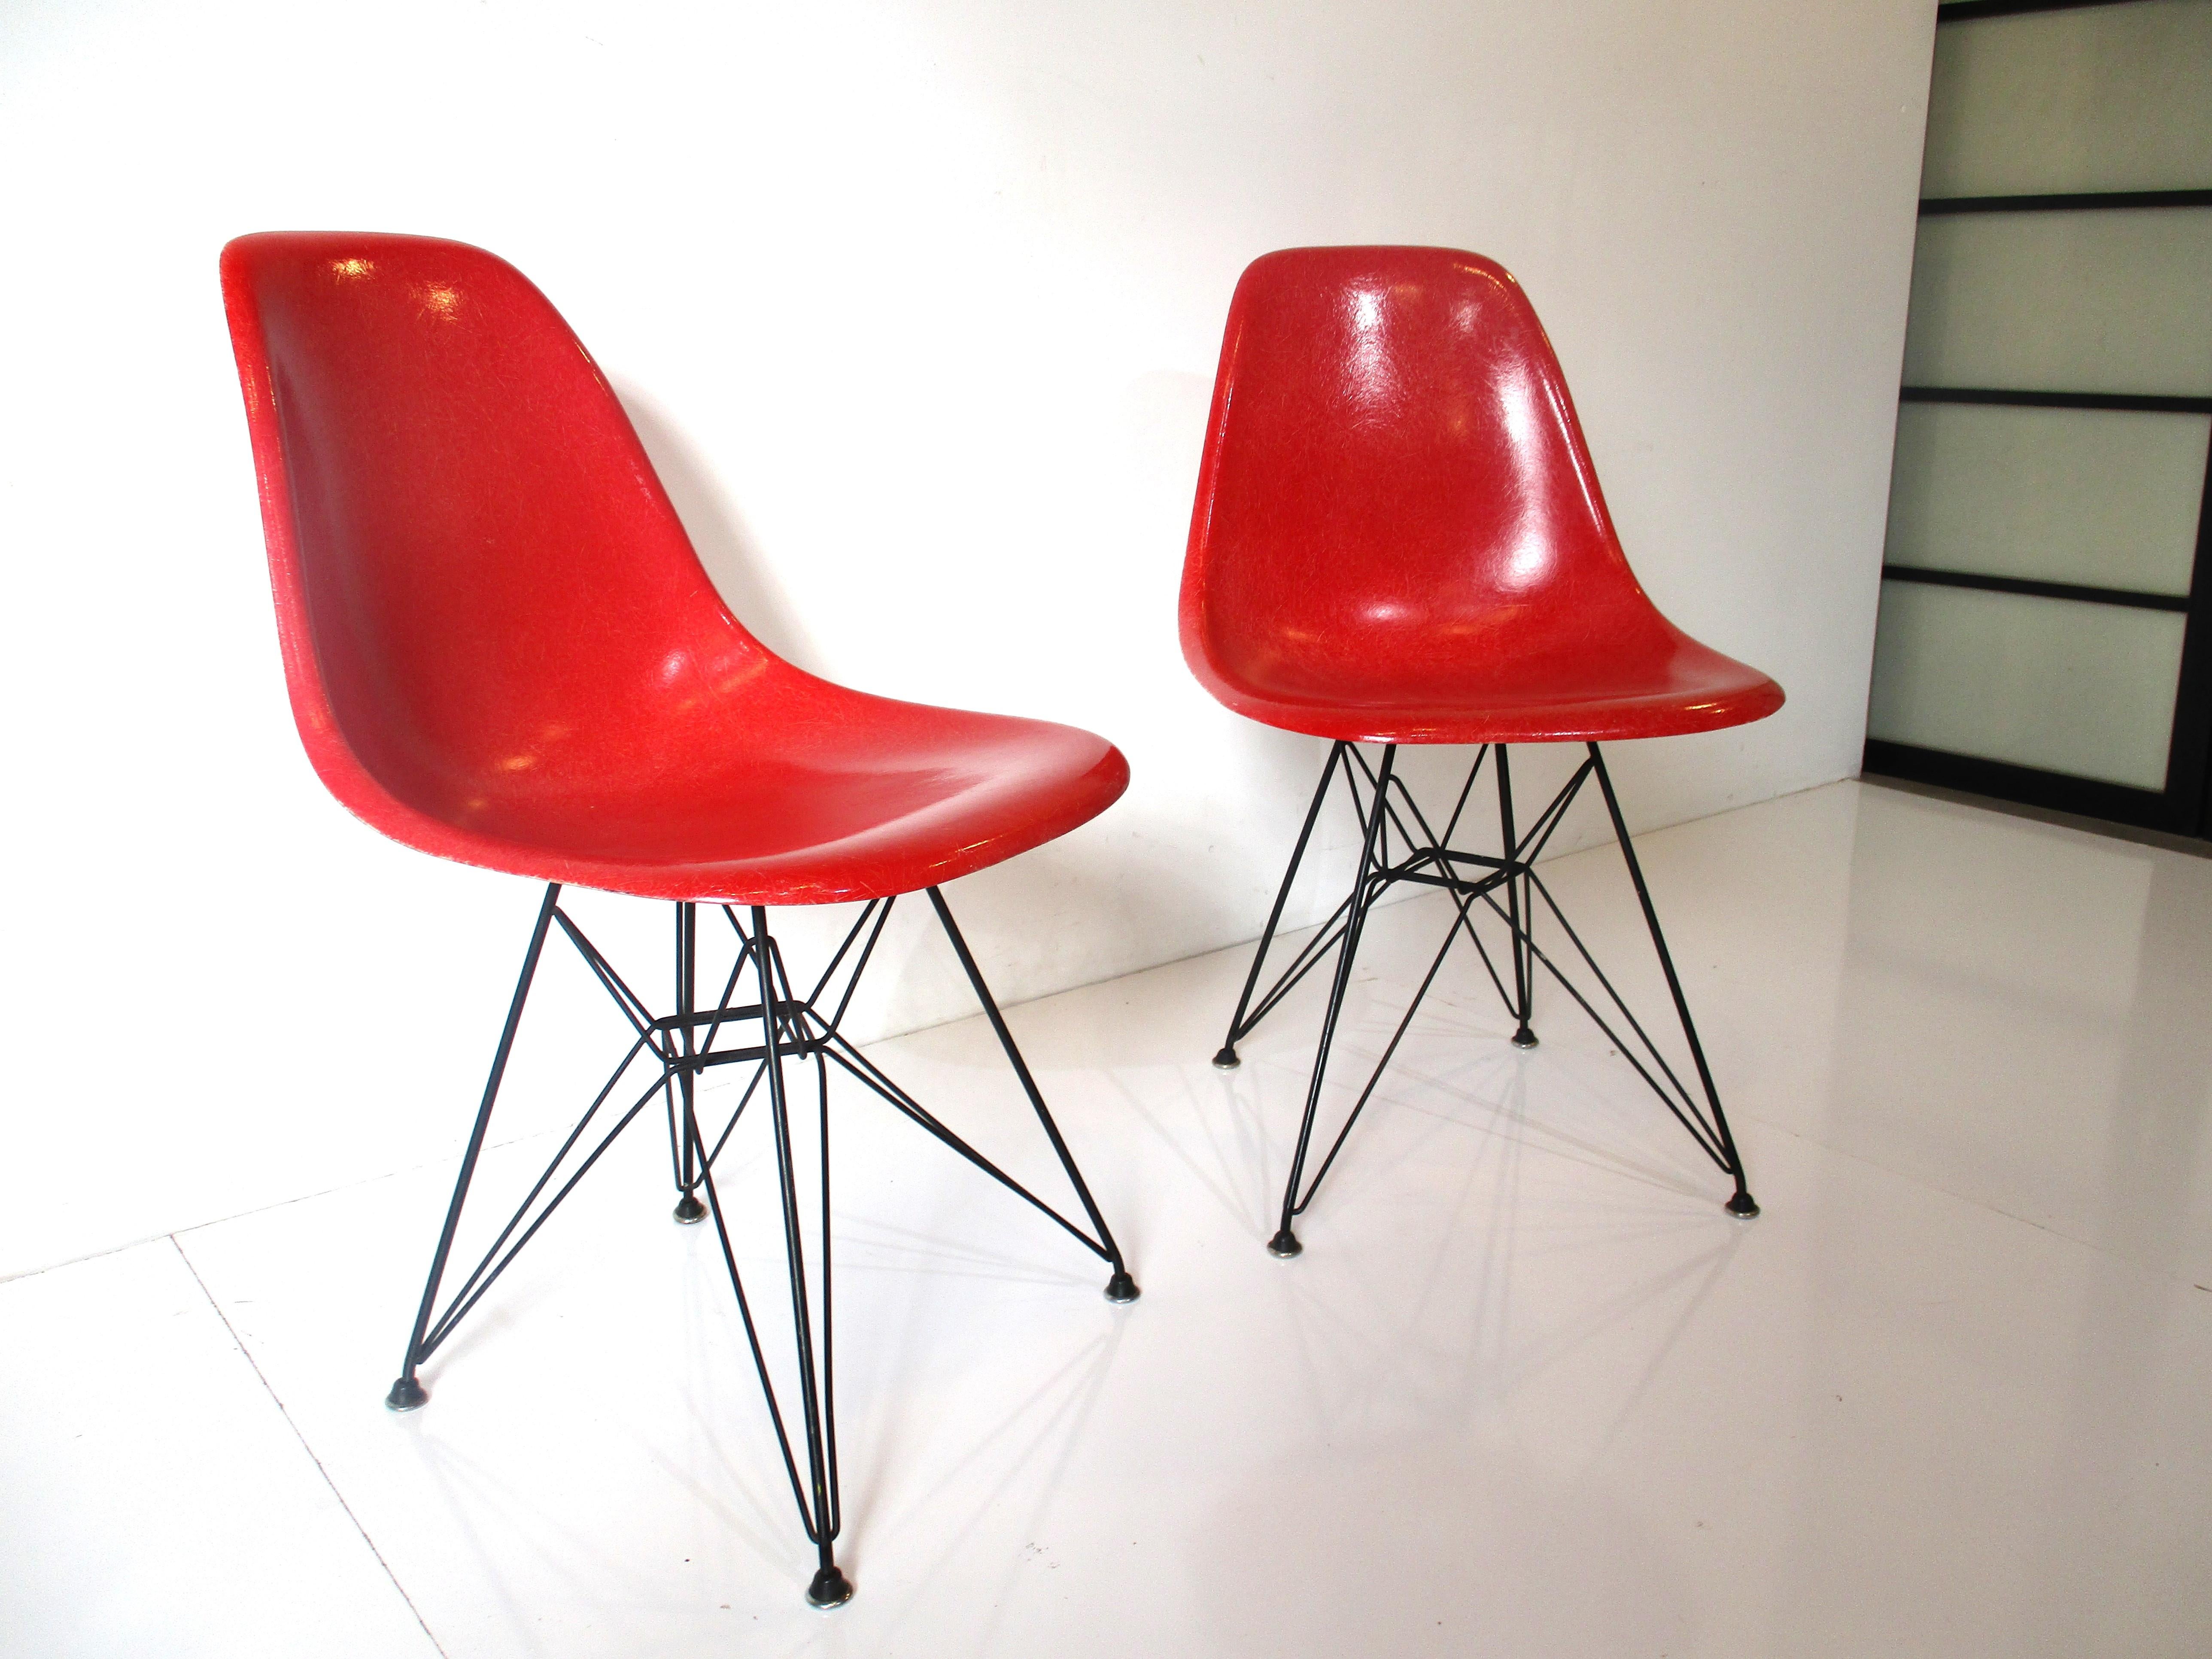 A pair of red molded fiberglass side shell or scoop chairs with sculptural satin black wire metal bases with rubber and metal foot pads. Called the Eiffel tower chairs because of the wire base structure design, manufactured by the Herman Miller